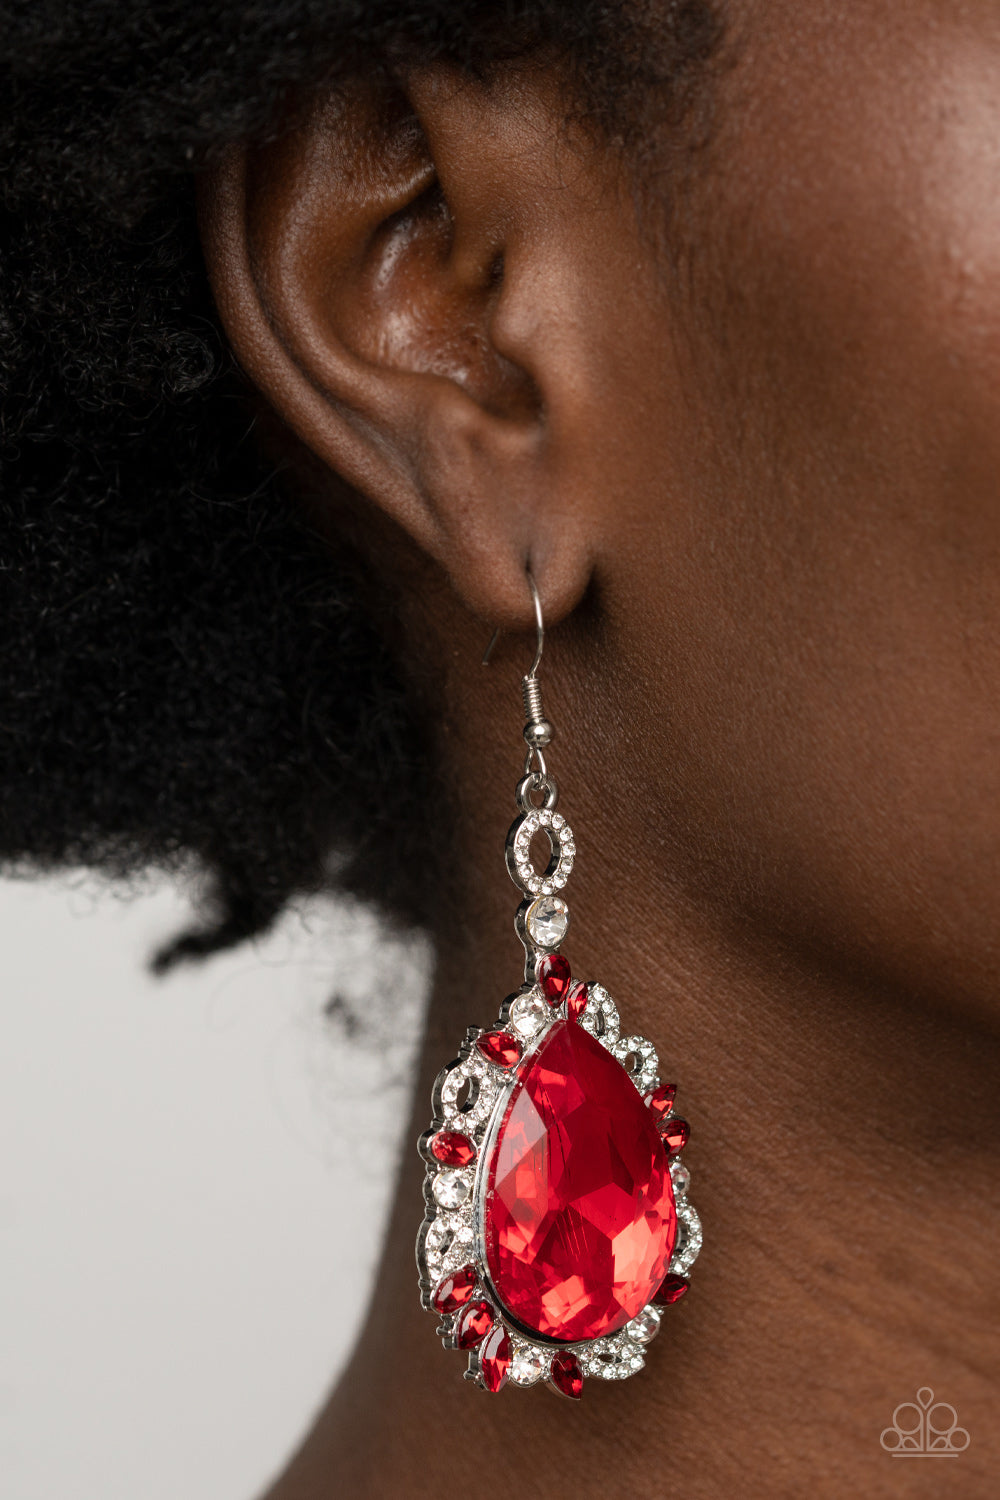 Royal Recognition Red Earring - Paparazzi Accessories.  Featuring round, teardrop, and oval shapes, red and white rhinestone encrusted filigree borders a dramatically oversized red rhinestone teardrop for a jaw-dropping dazzle. Earring attaches to a standard fishhook fitting.  ﻿﻿﻿All Paparazzi Accessories are lead free and nickel free!  Sold as one pair of earrings.